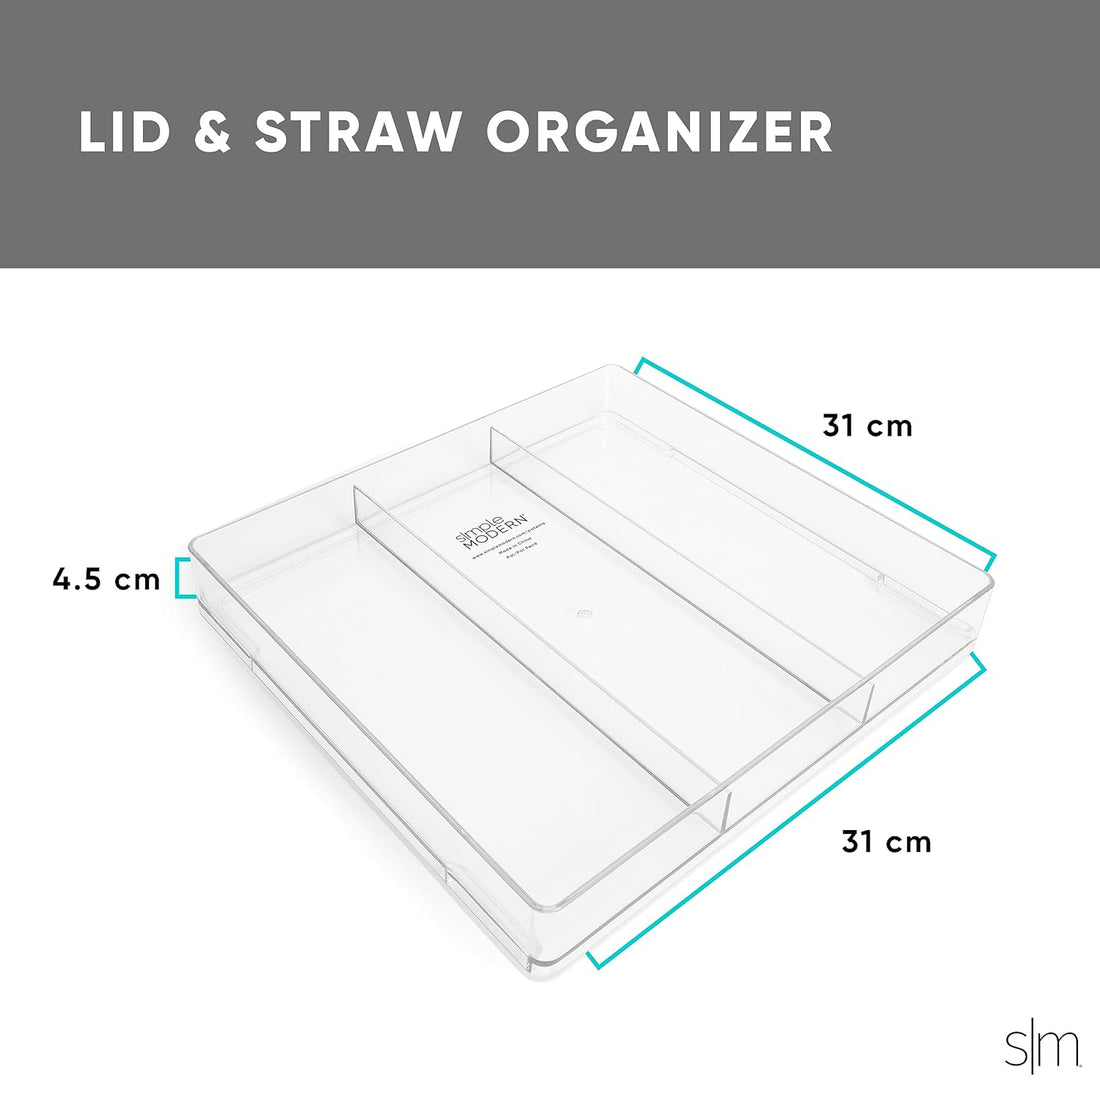 Simple Modern Straw and Lid Organizer for Bottle Organizer | Stackable Storage Plastic Organizer Tray for Bottle & Tumbler Accessories | Organization Shelf for Pantry Kitchen Refrigerator Countertop